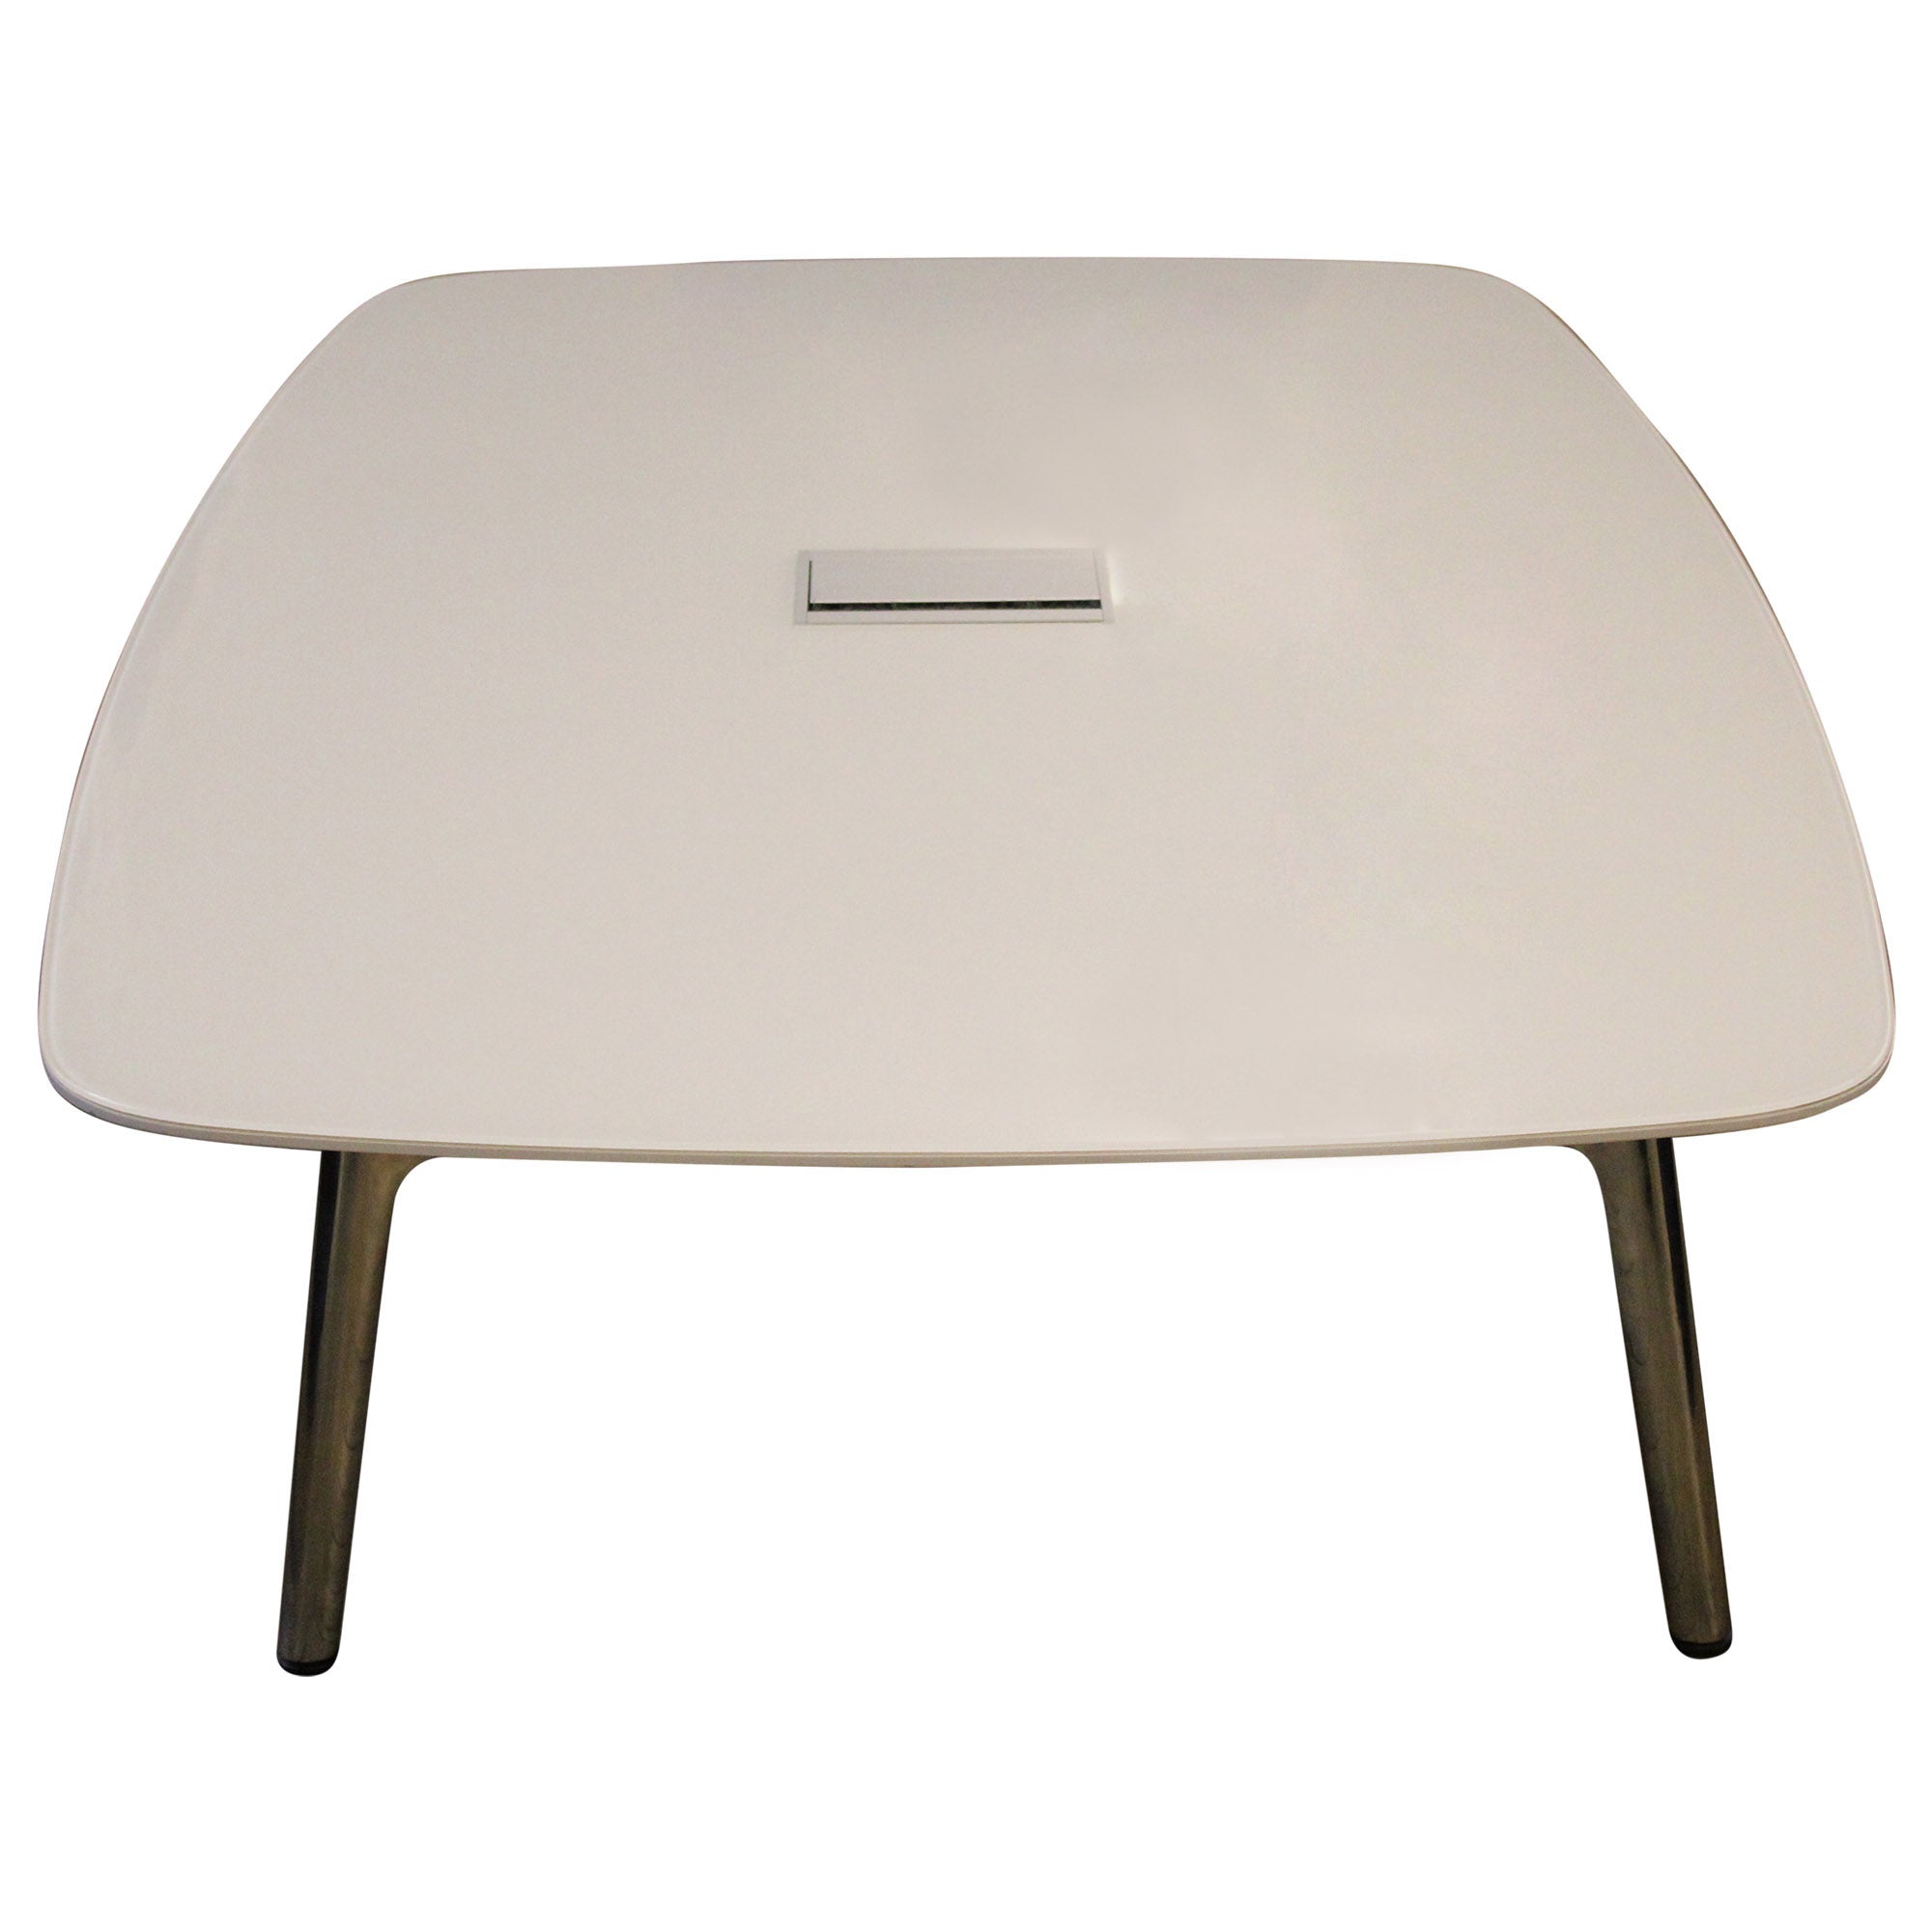 Collaborative Coffee Table, White - Preowned